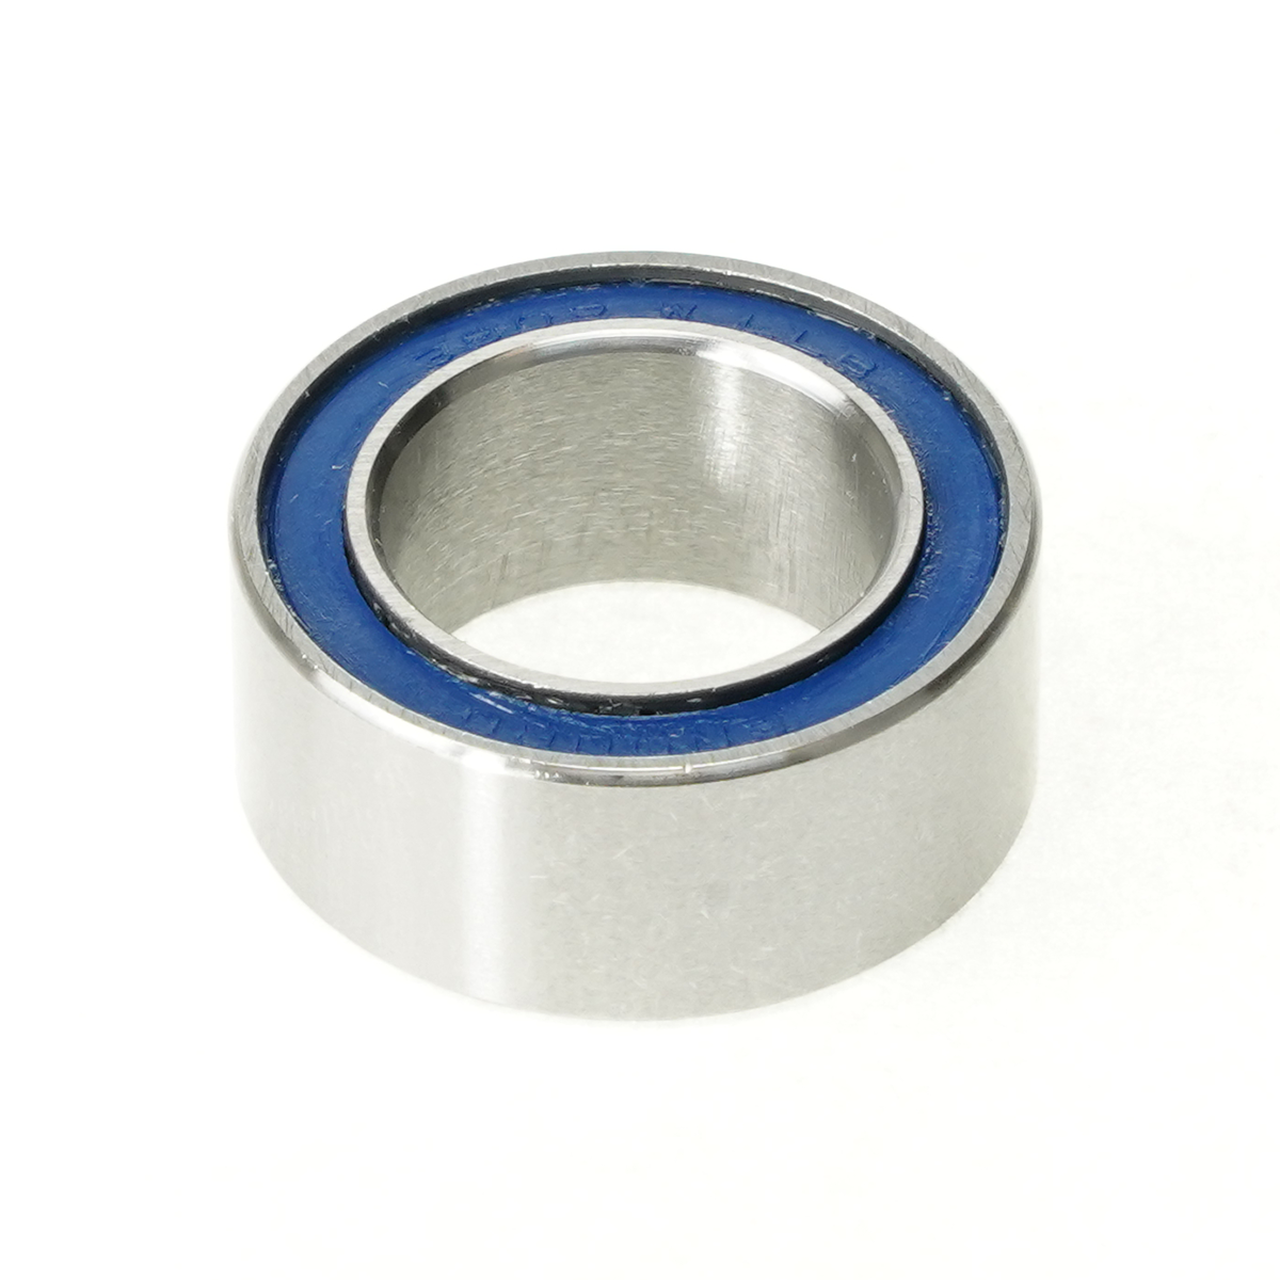 Enduro 3803 LLB W - ABEC-3, Extra-Wide, Double-Row, Radial Bearing (C3 Clearance) - 17mm x 26mm x 10mm